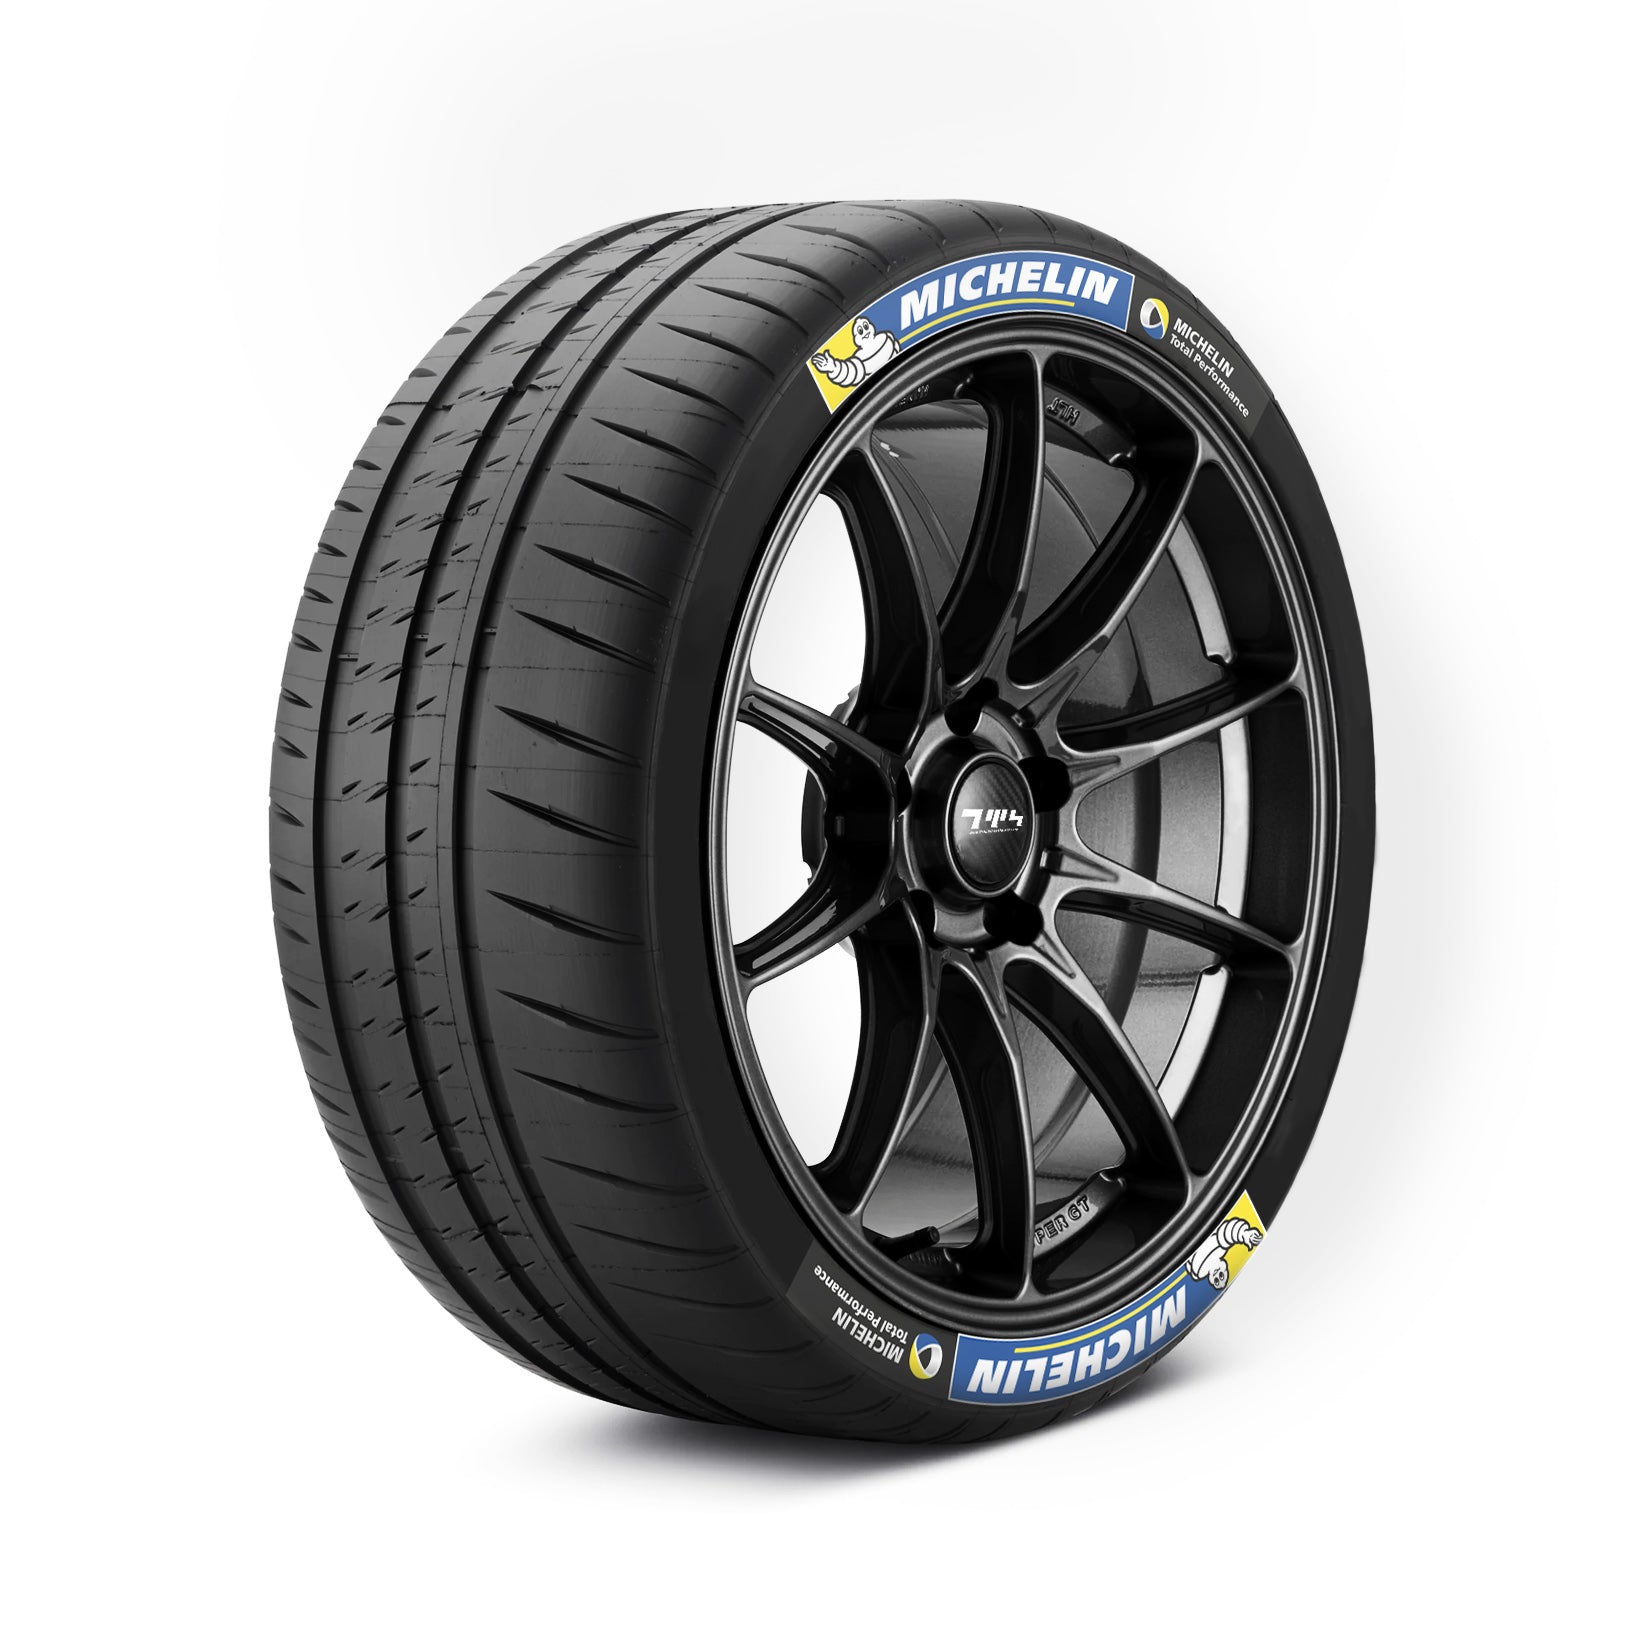 MICHELIN Total Performance Printed Tyre Stickers Kit